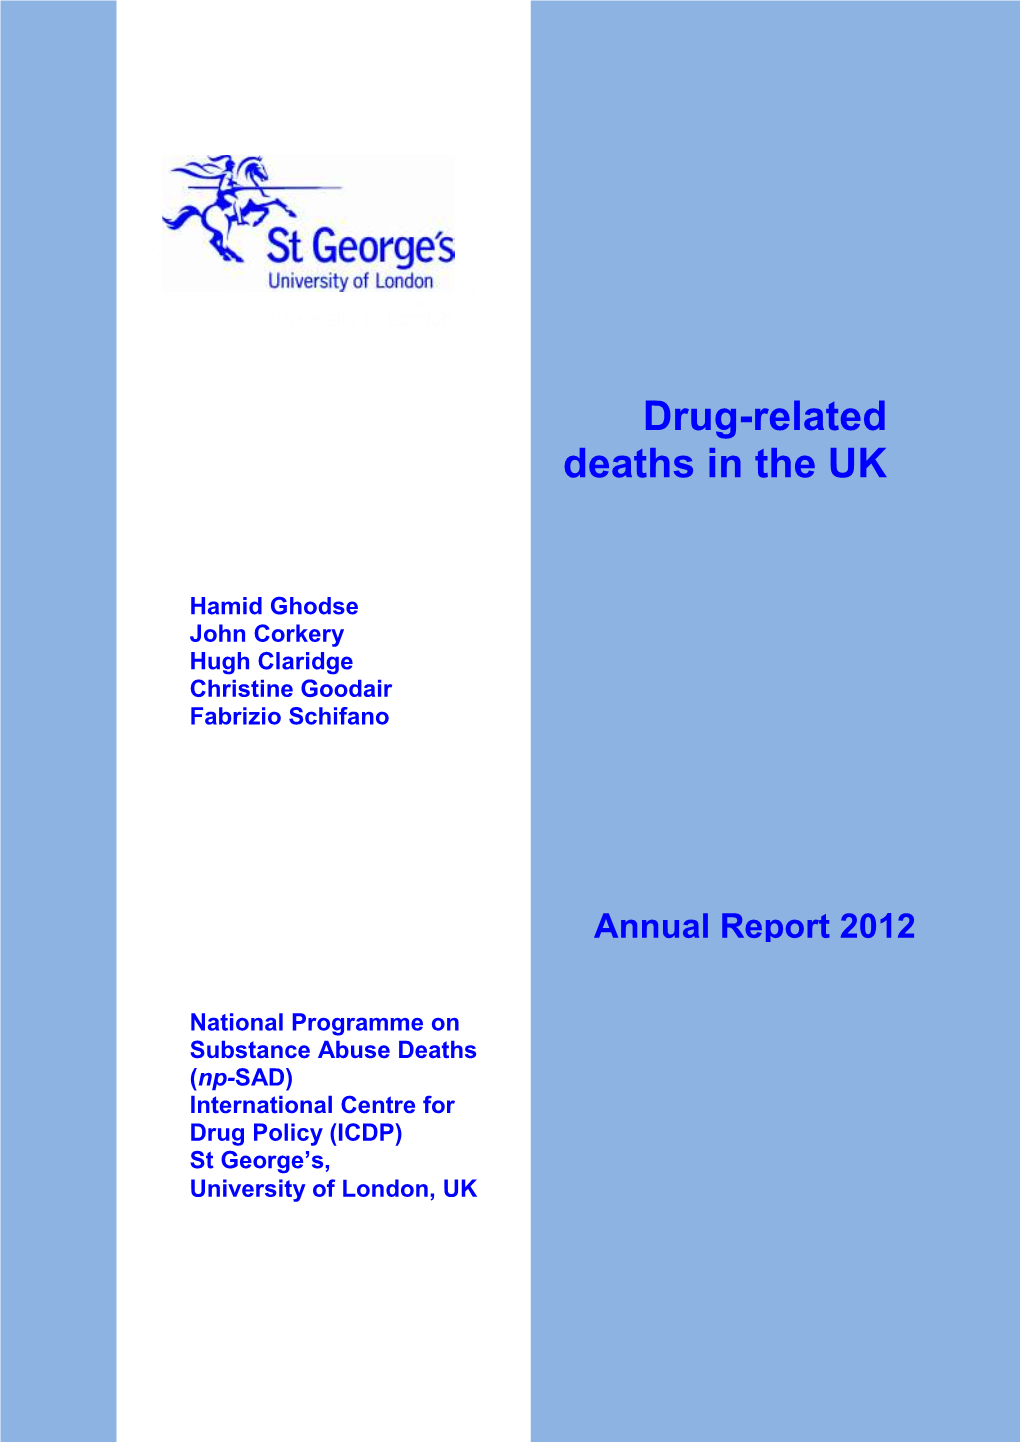 NPSAD Drug Related Deaths Annual Report 2012